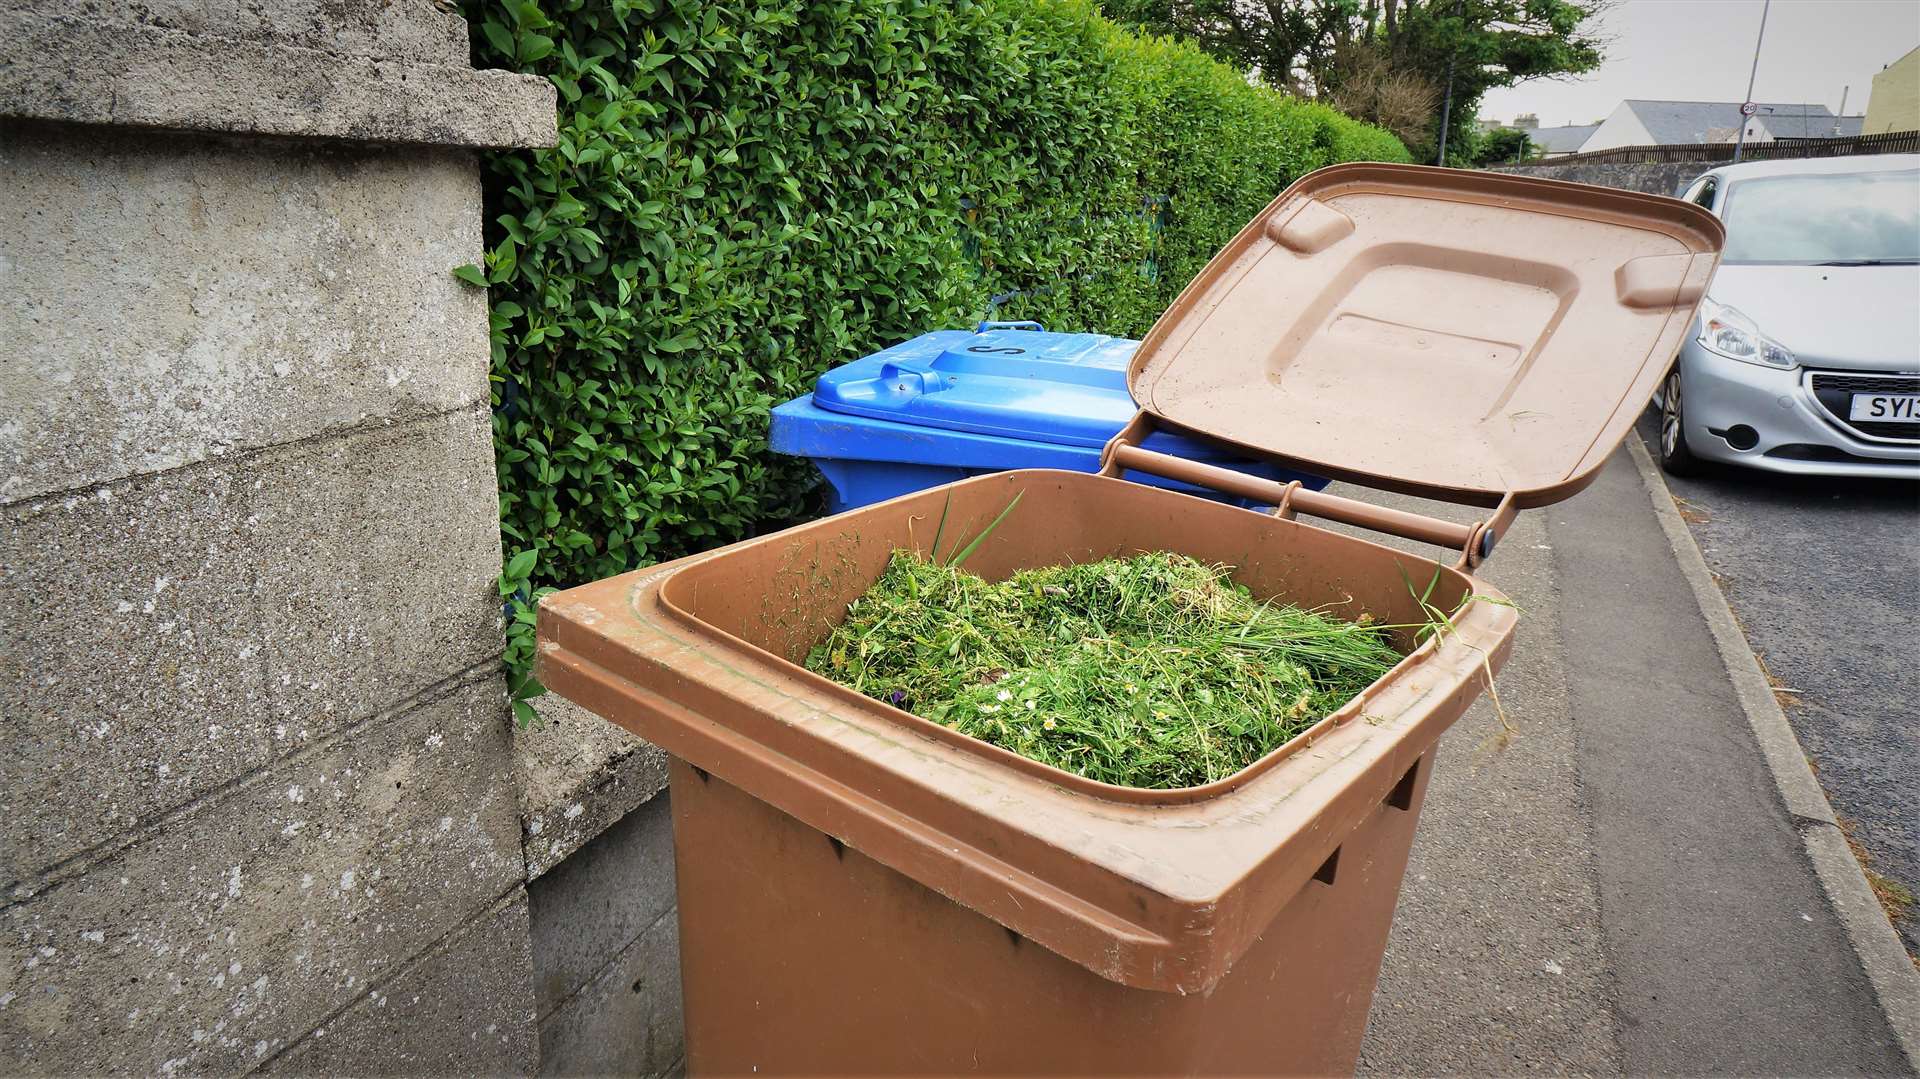 Brown bin permits for 2021/22 year expire today.